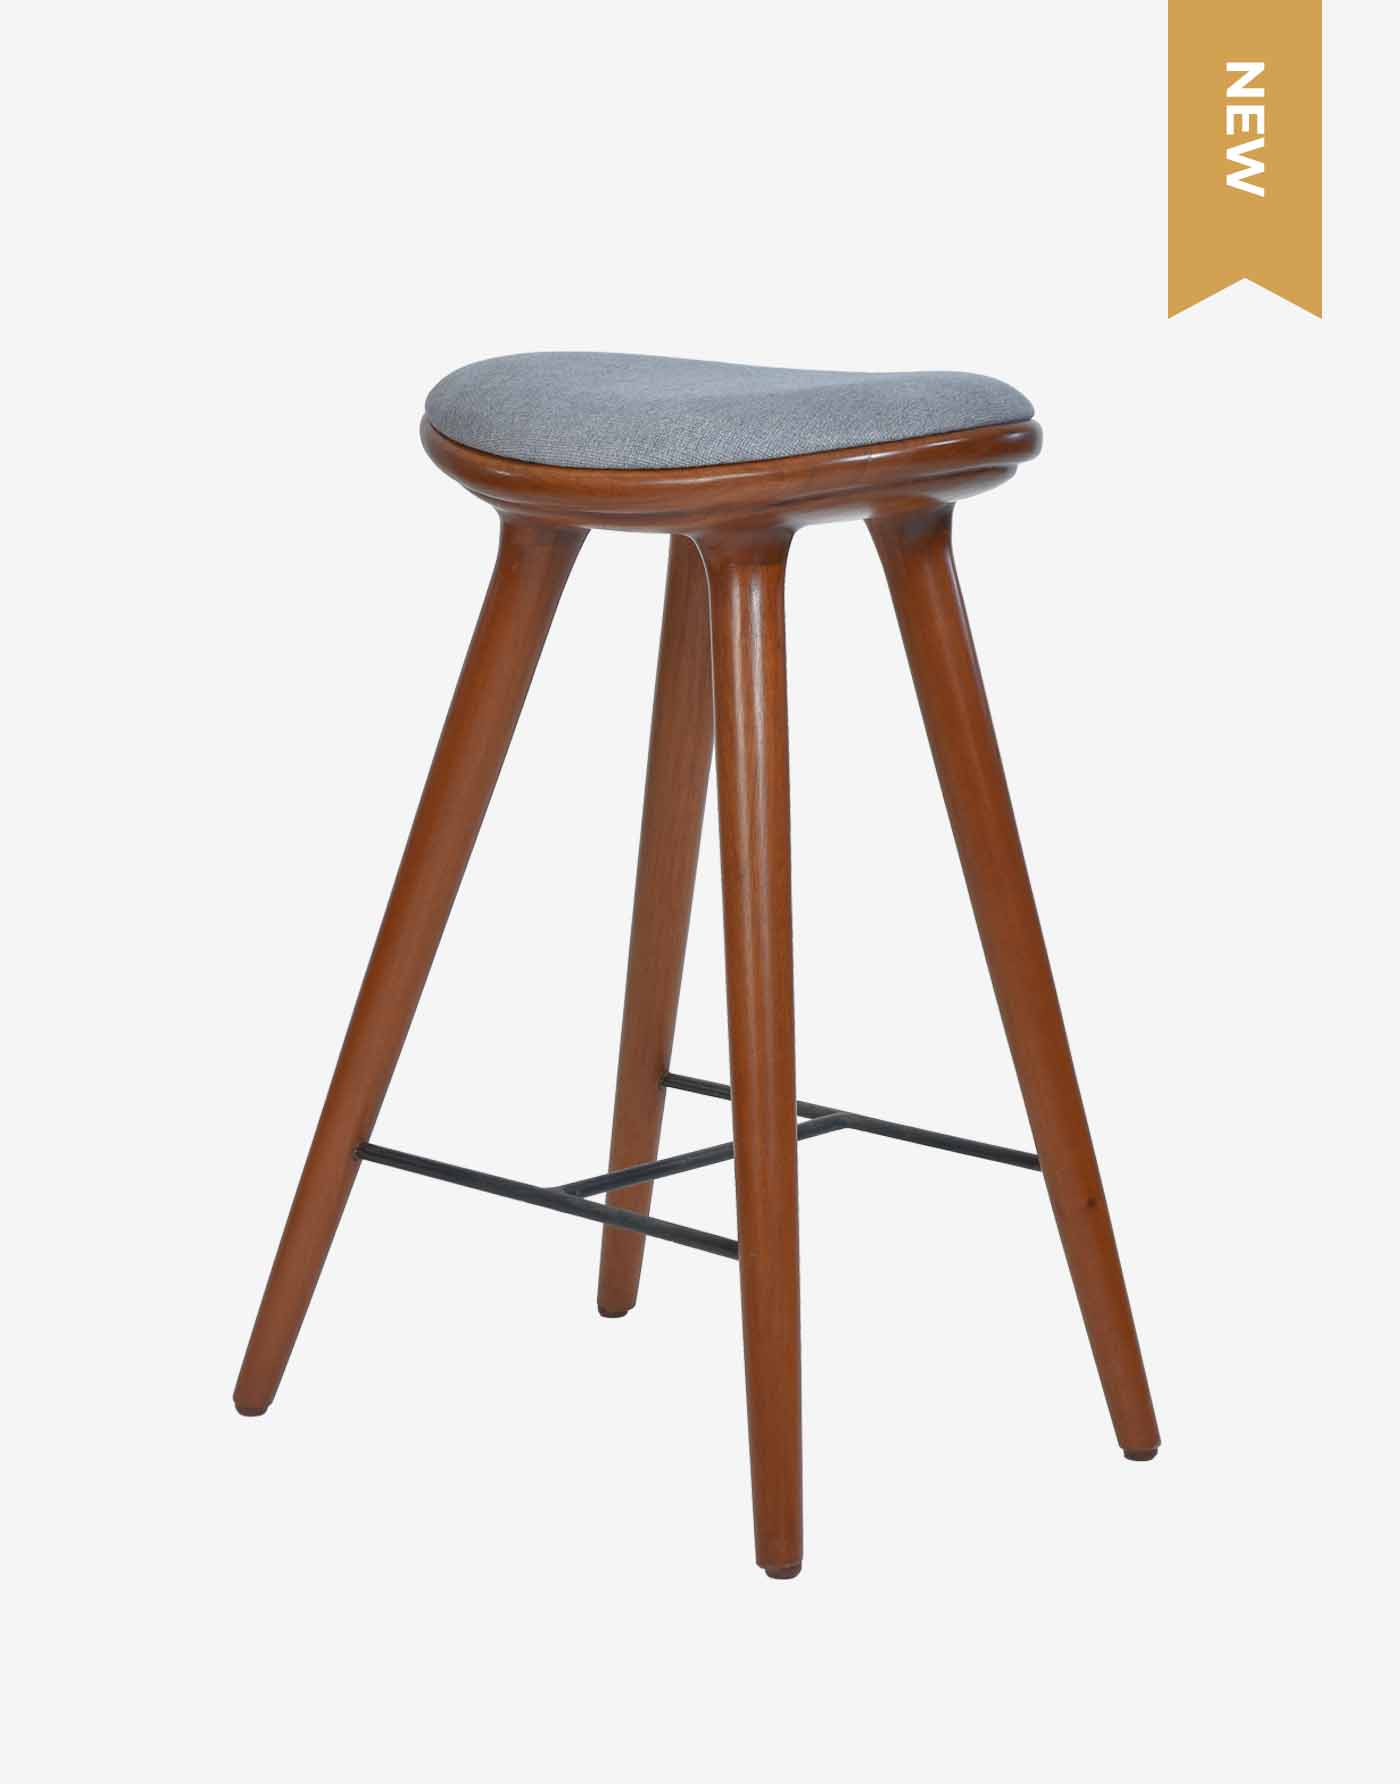 Bar Stool - Focolare Carpentry - Bespoke Furniture Philippines - Custom-made Chairs, Tables, Beds, Sofa, Cabinets, Handicraft, Woodworks.